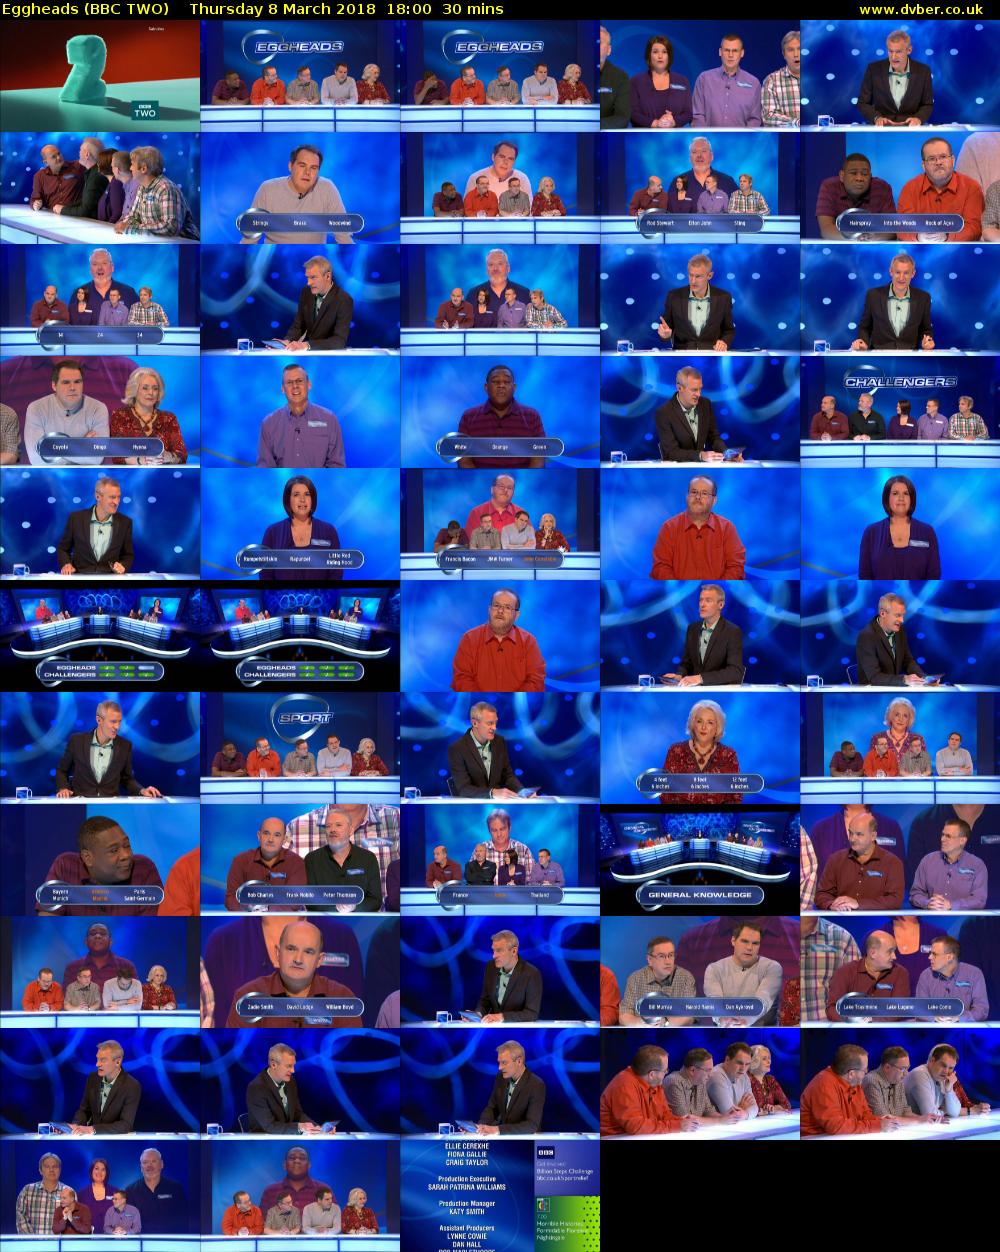 Eggheads (BBC TWO) Thursday 8 March 2018 18:00 - 18:30